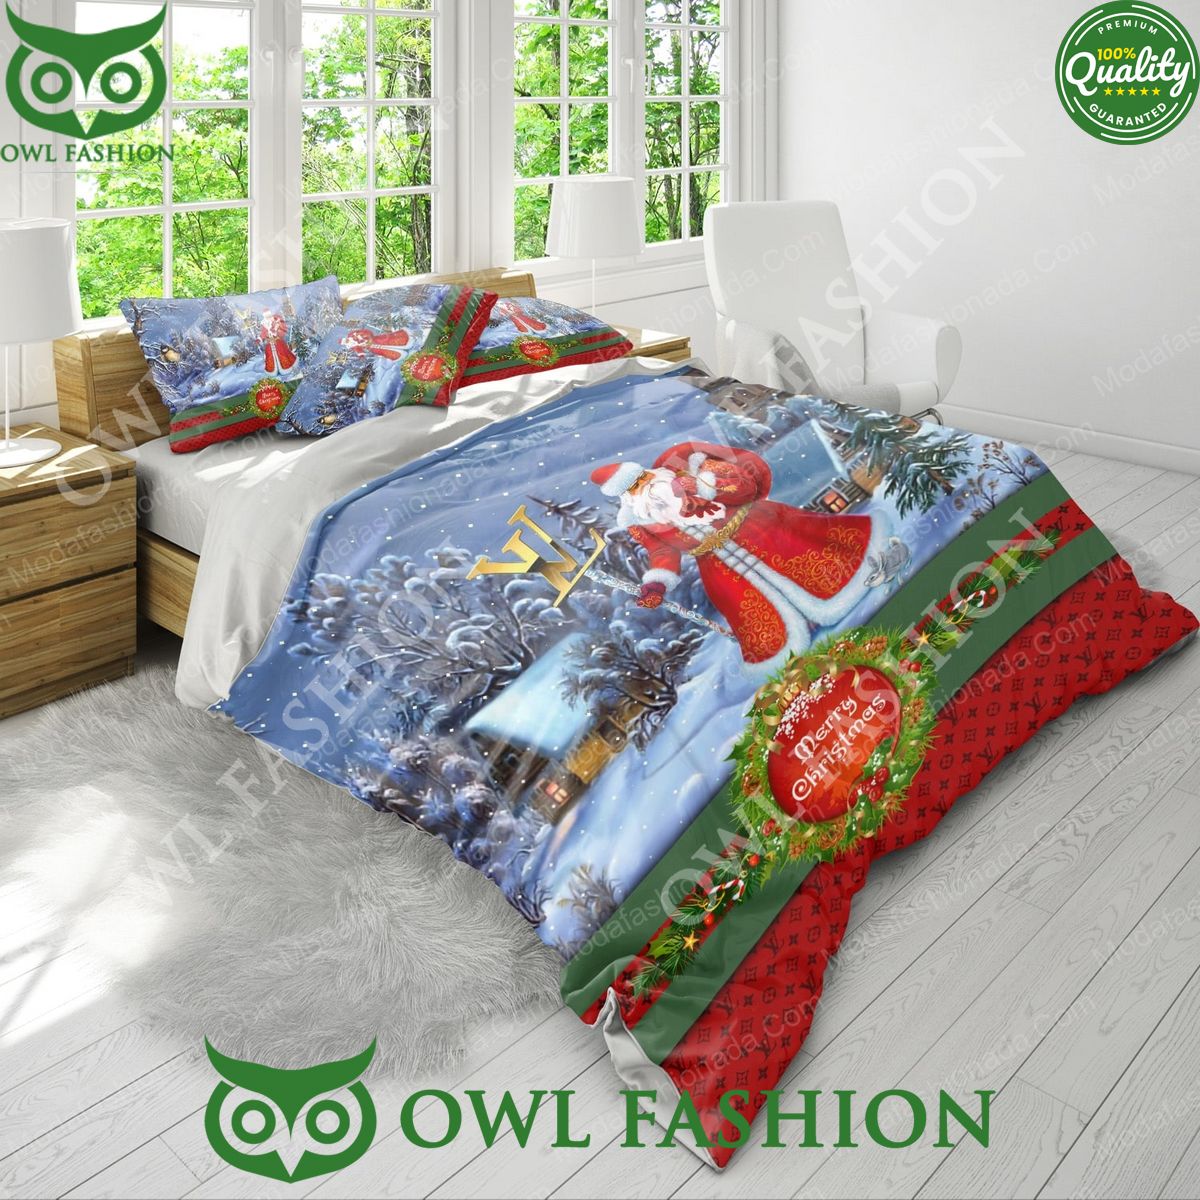 Santa Claus Louis Vuitton Merry Christmas Bedding Sets She has grown up know